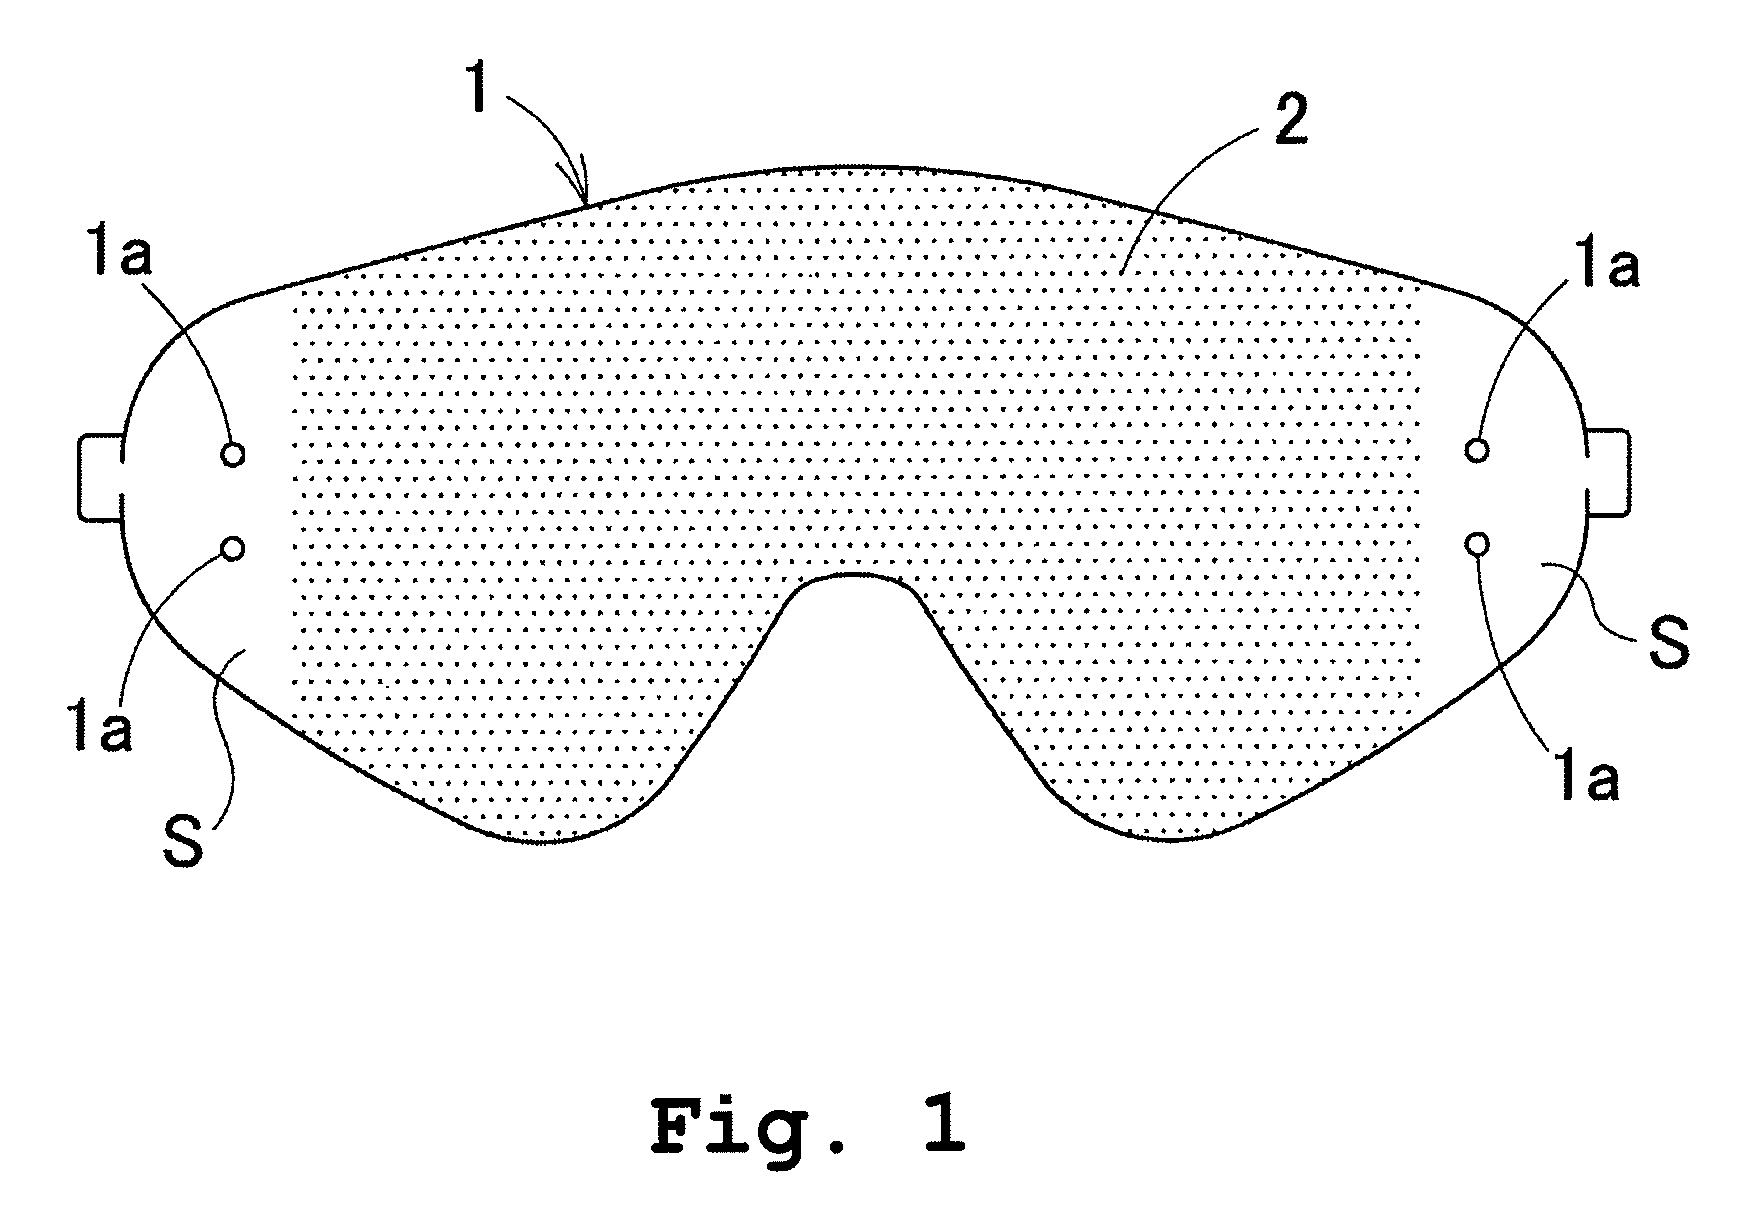 Fog-resistant structure and protective device for eyes